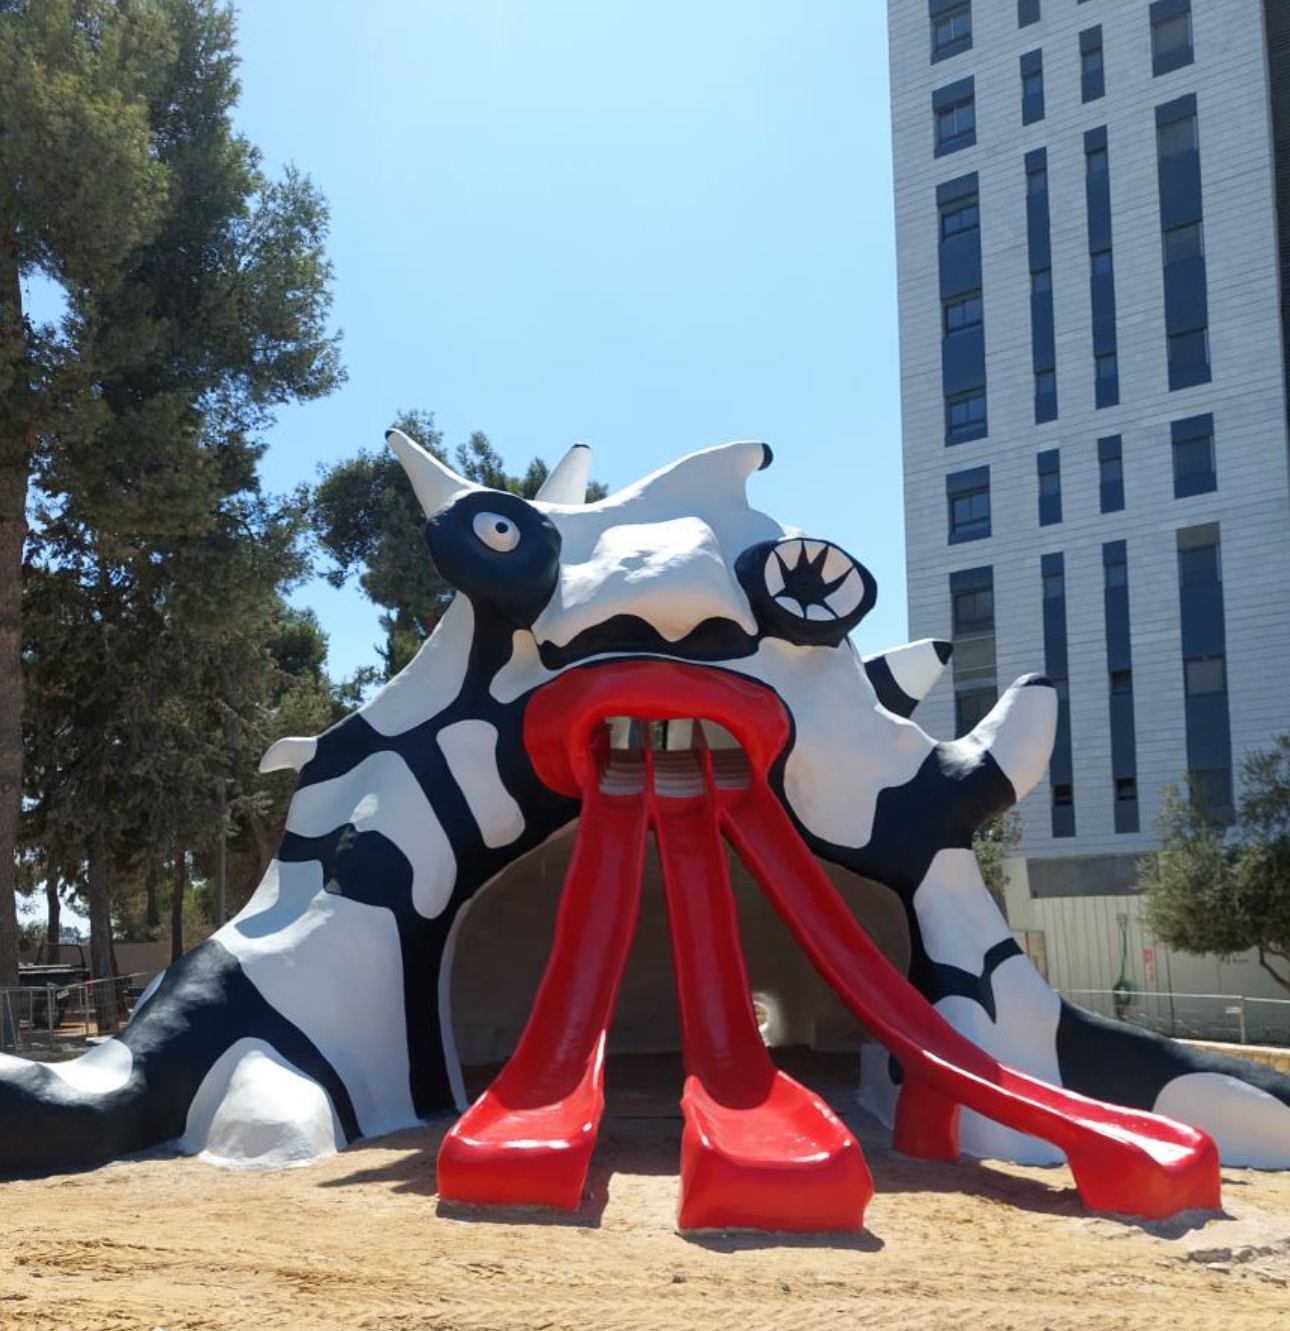 black and white cement sculpture of a monster with three red tongues